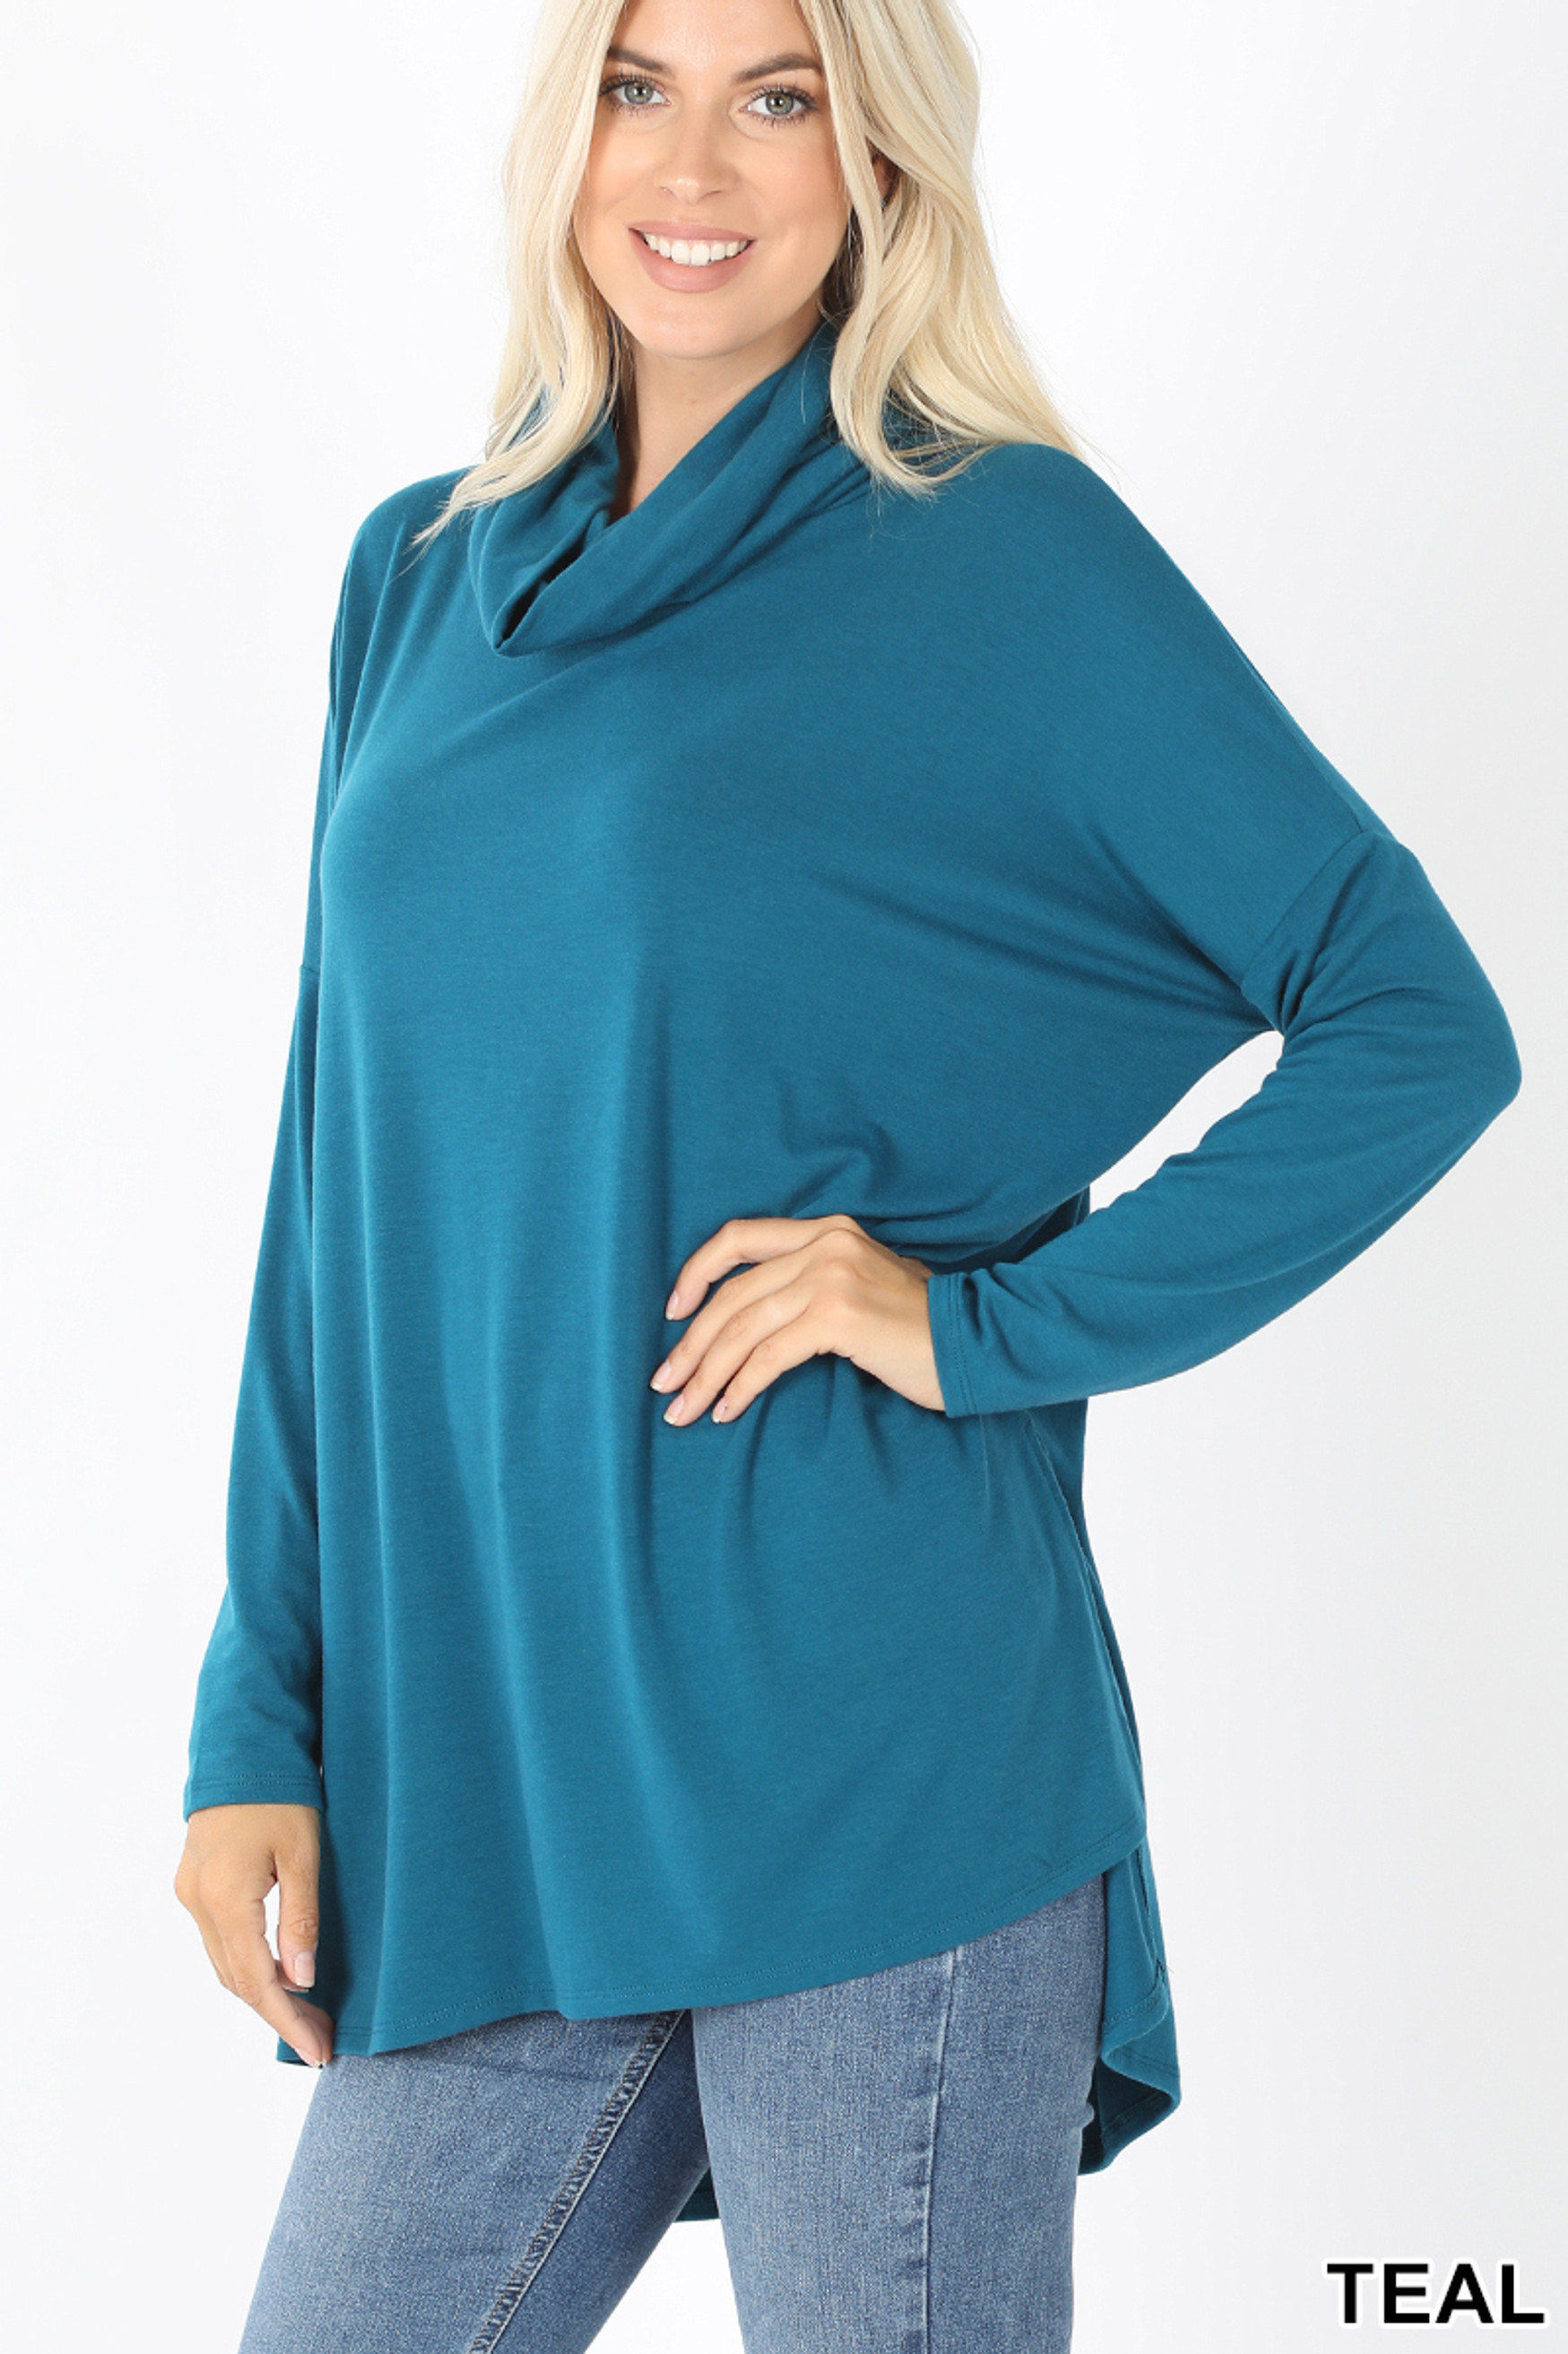 45 Degree Front image of Teal Cowl Neck Hi-Low Long Sleeve Top